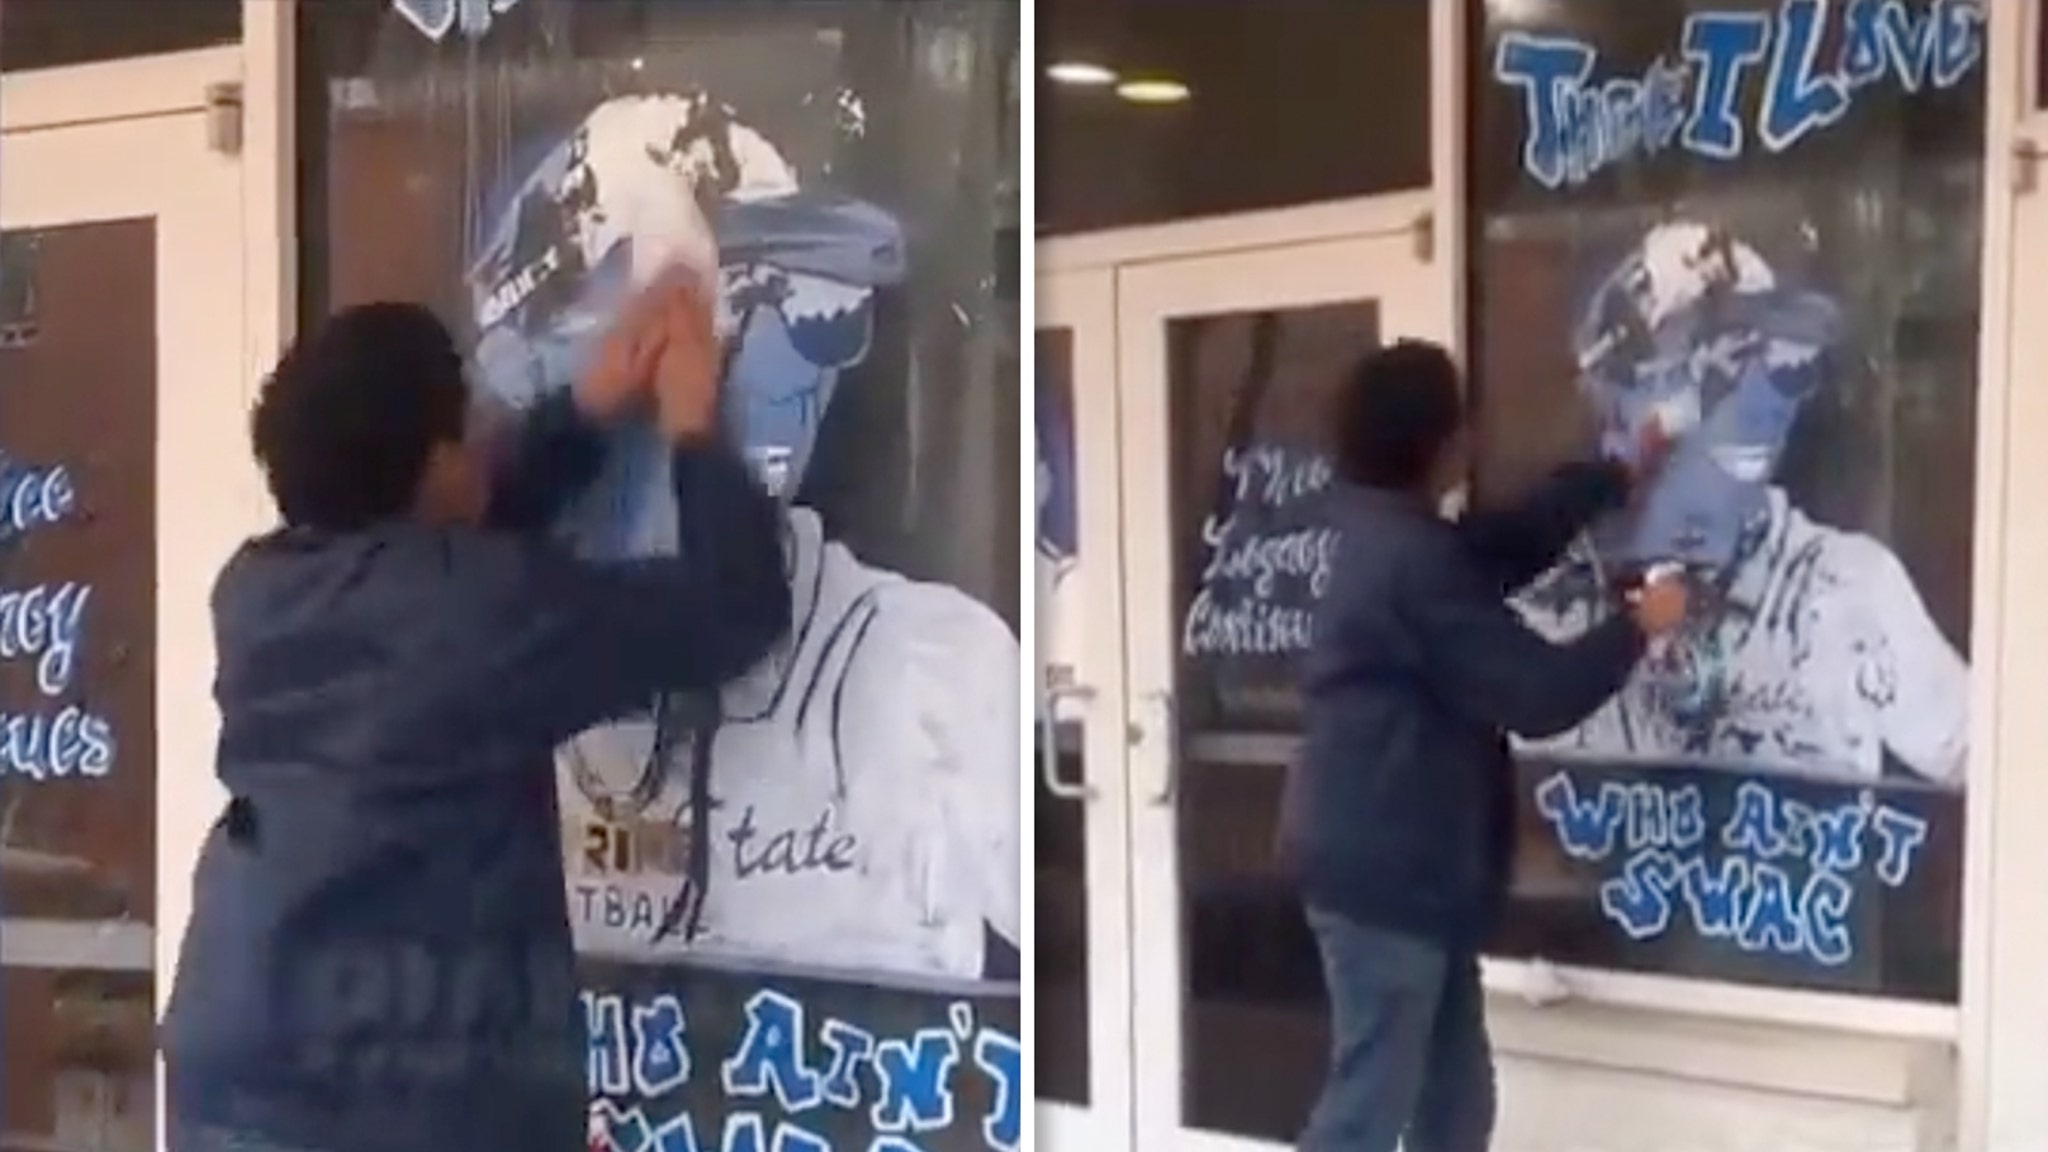 Deion Sanders JSU Mural Defaced, But Not By Student In Viral Video, School Says thumbnail